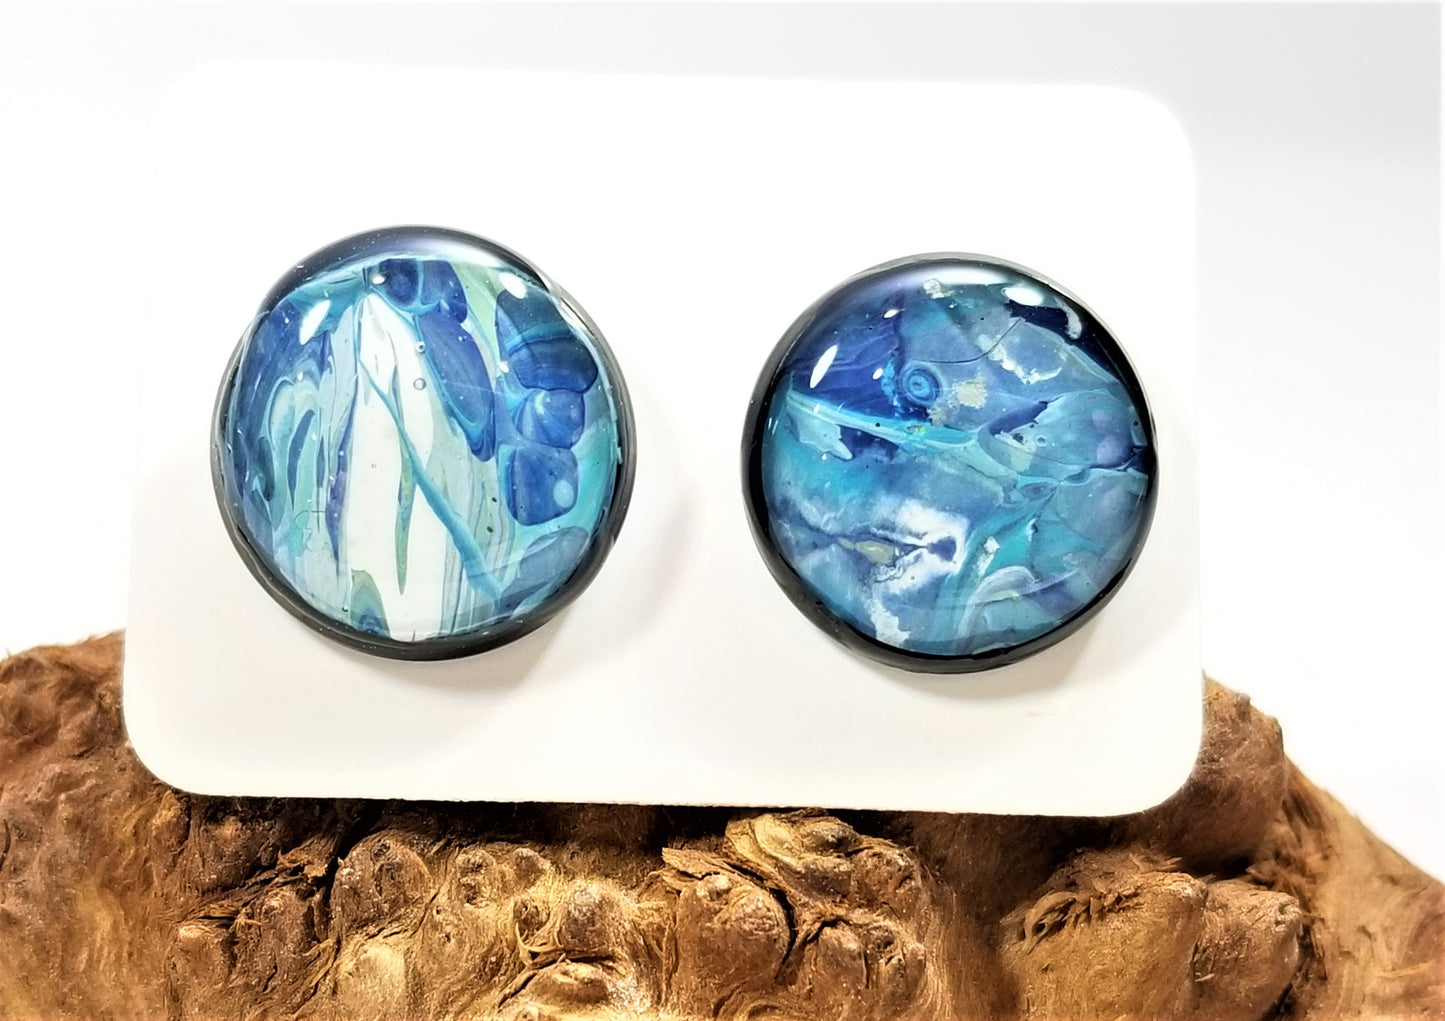 Acrylic Pour Skin with Resin Dome / Black Stud Earrings